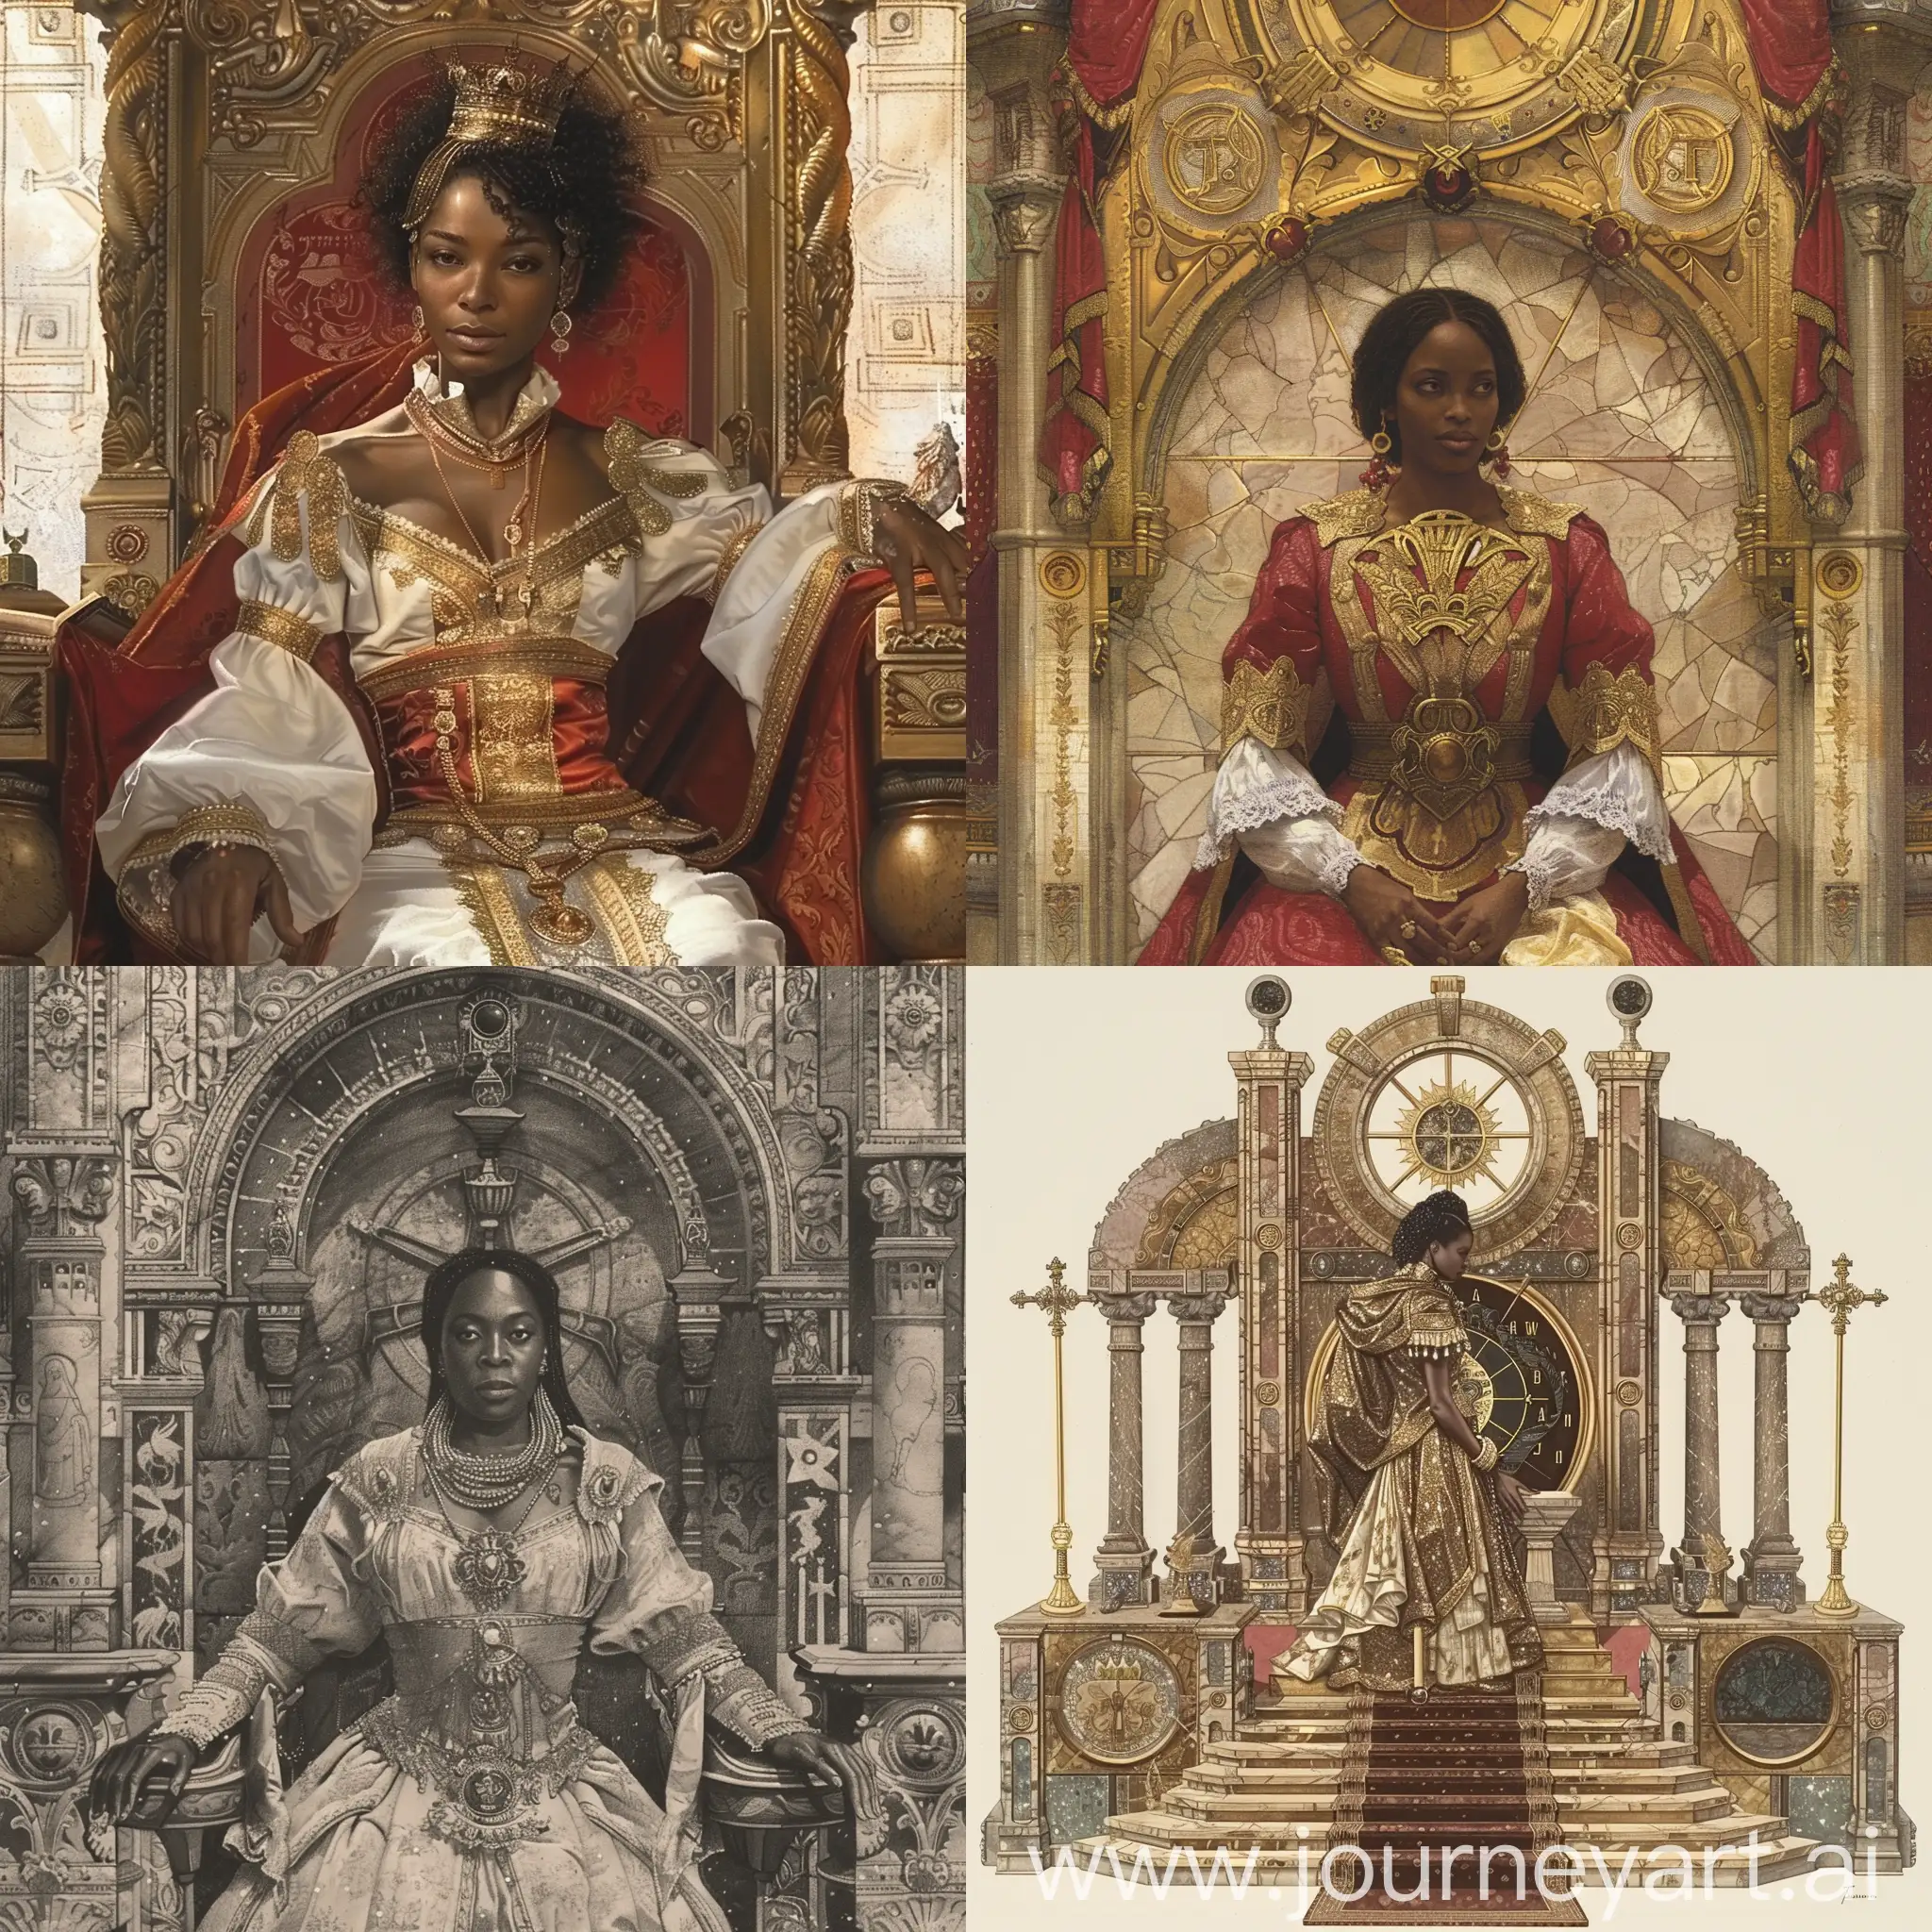 Majestic-Black-Priestess-Observing-from-Ornate-Throne